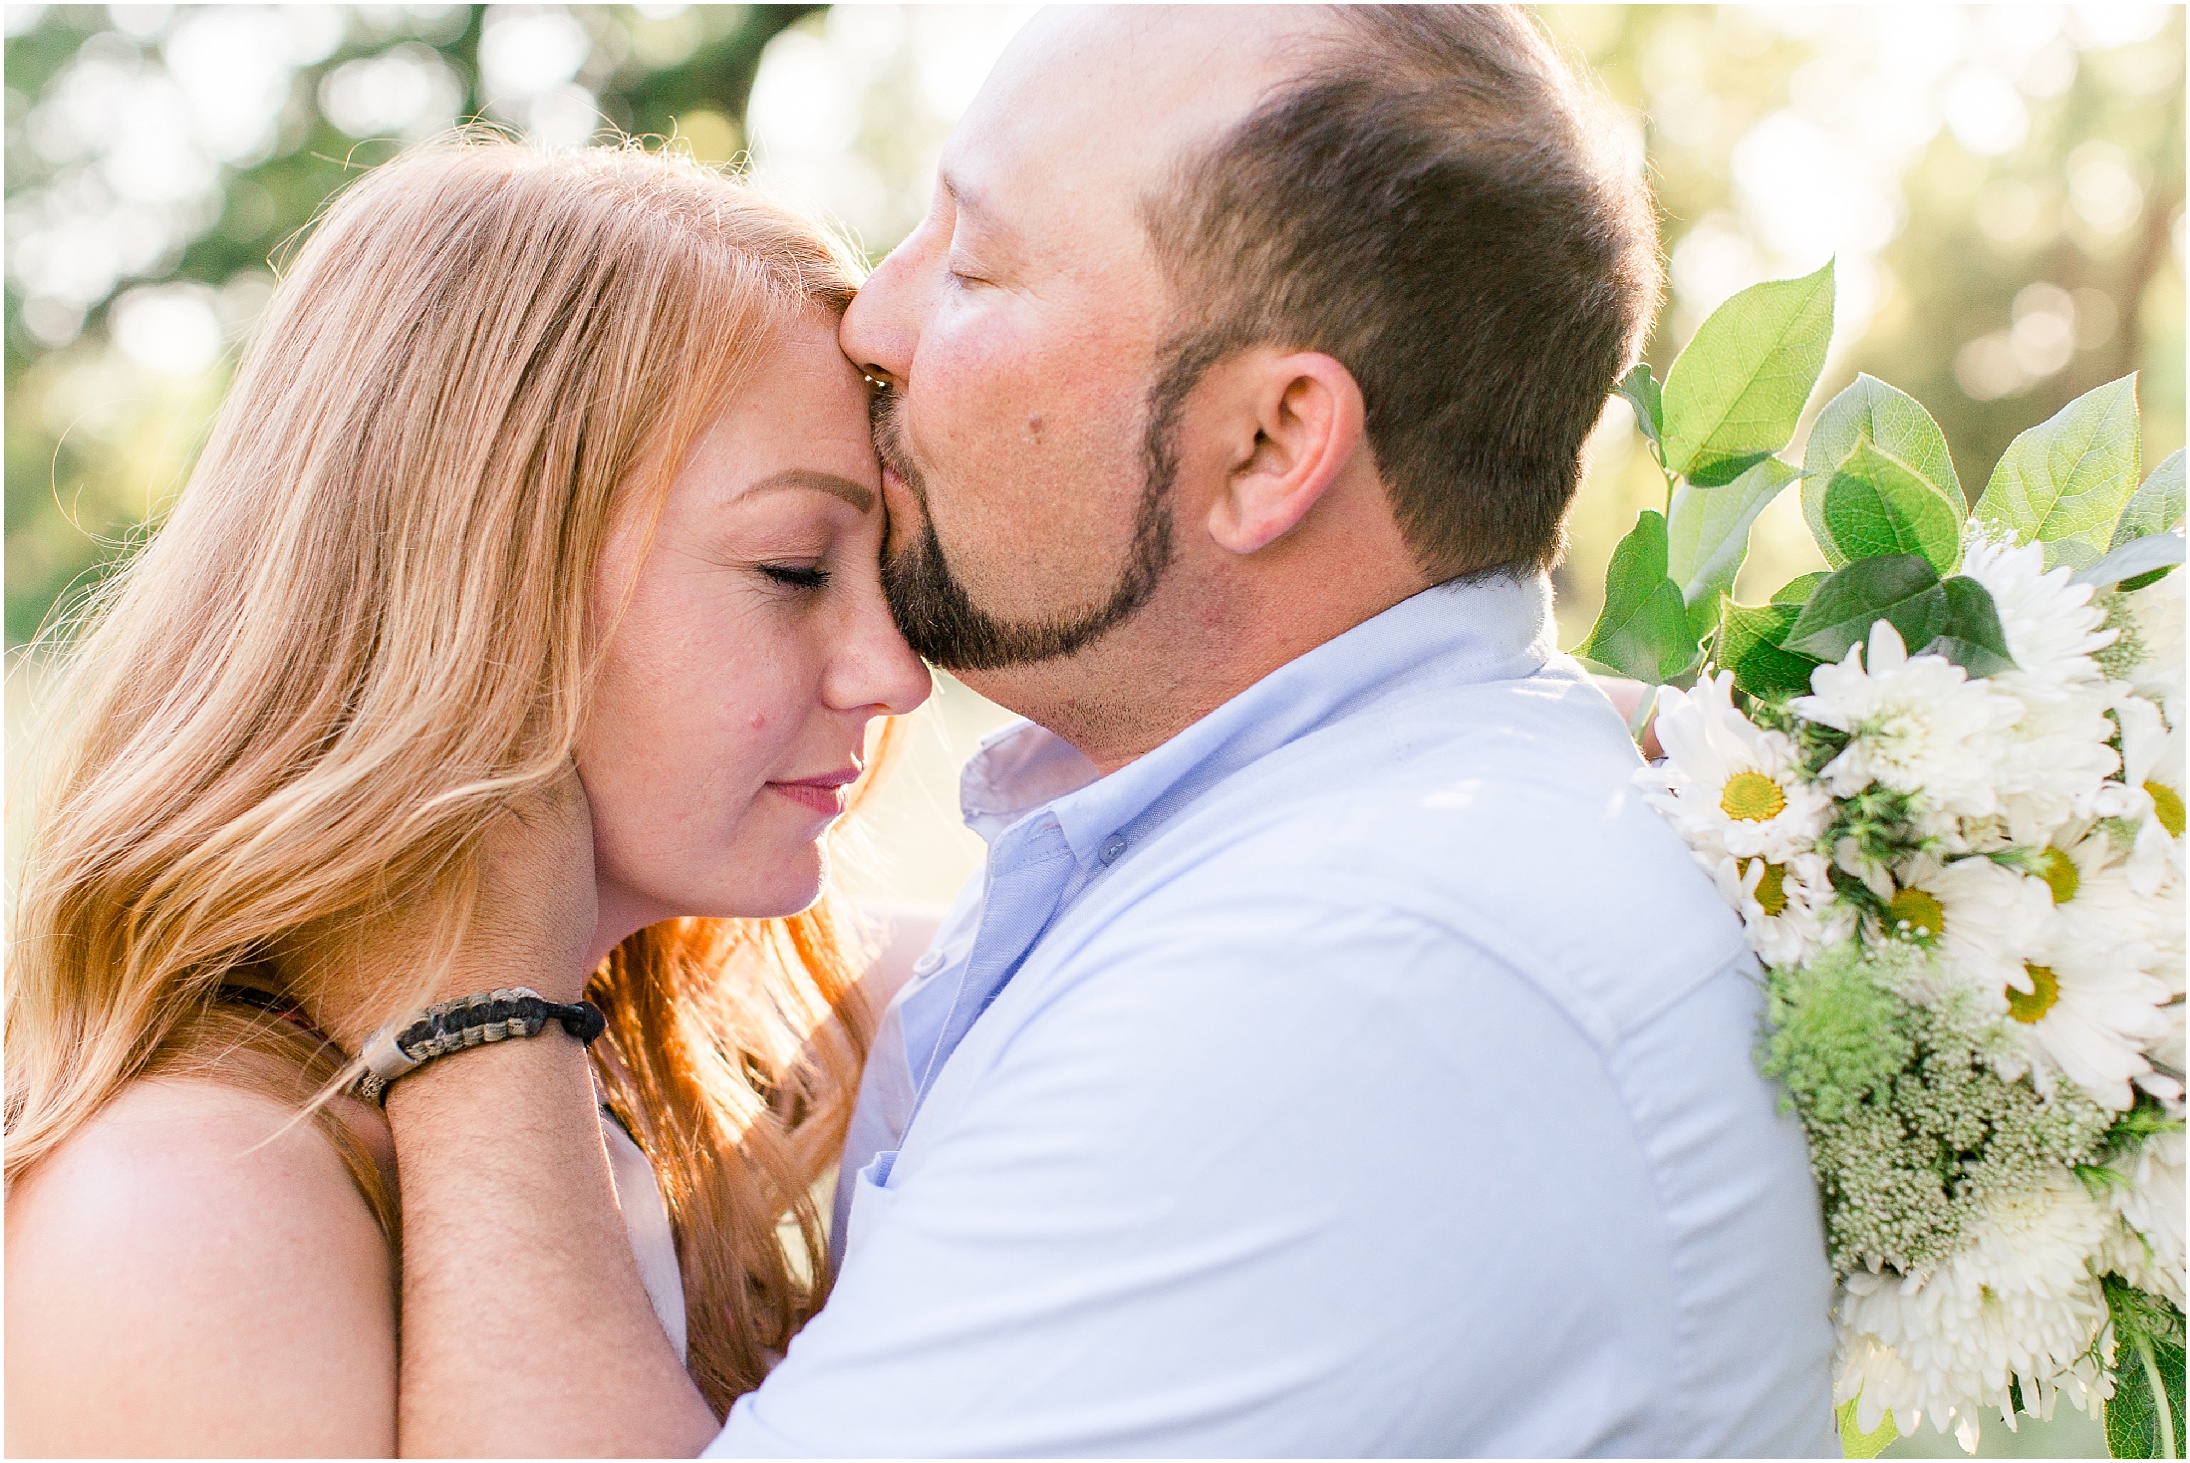 Lower Bidwell Park Engagement Session,